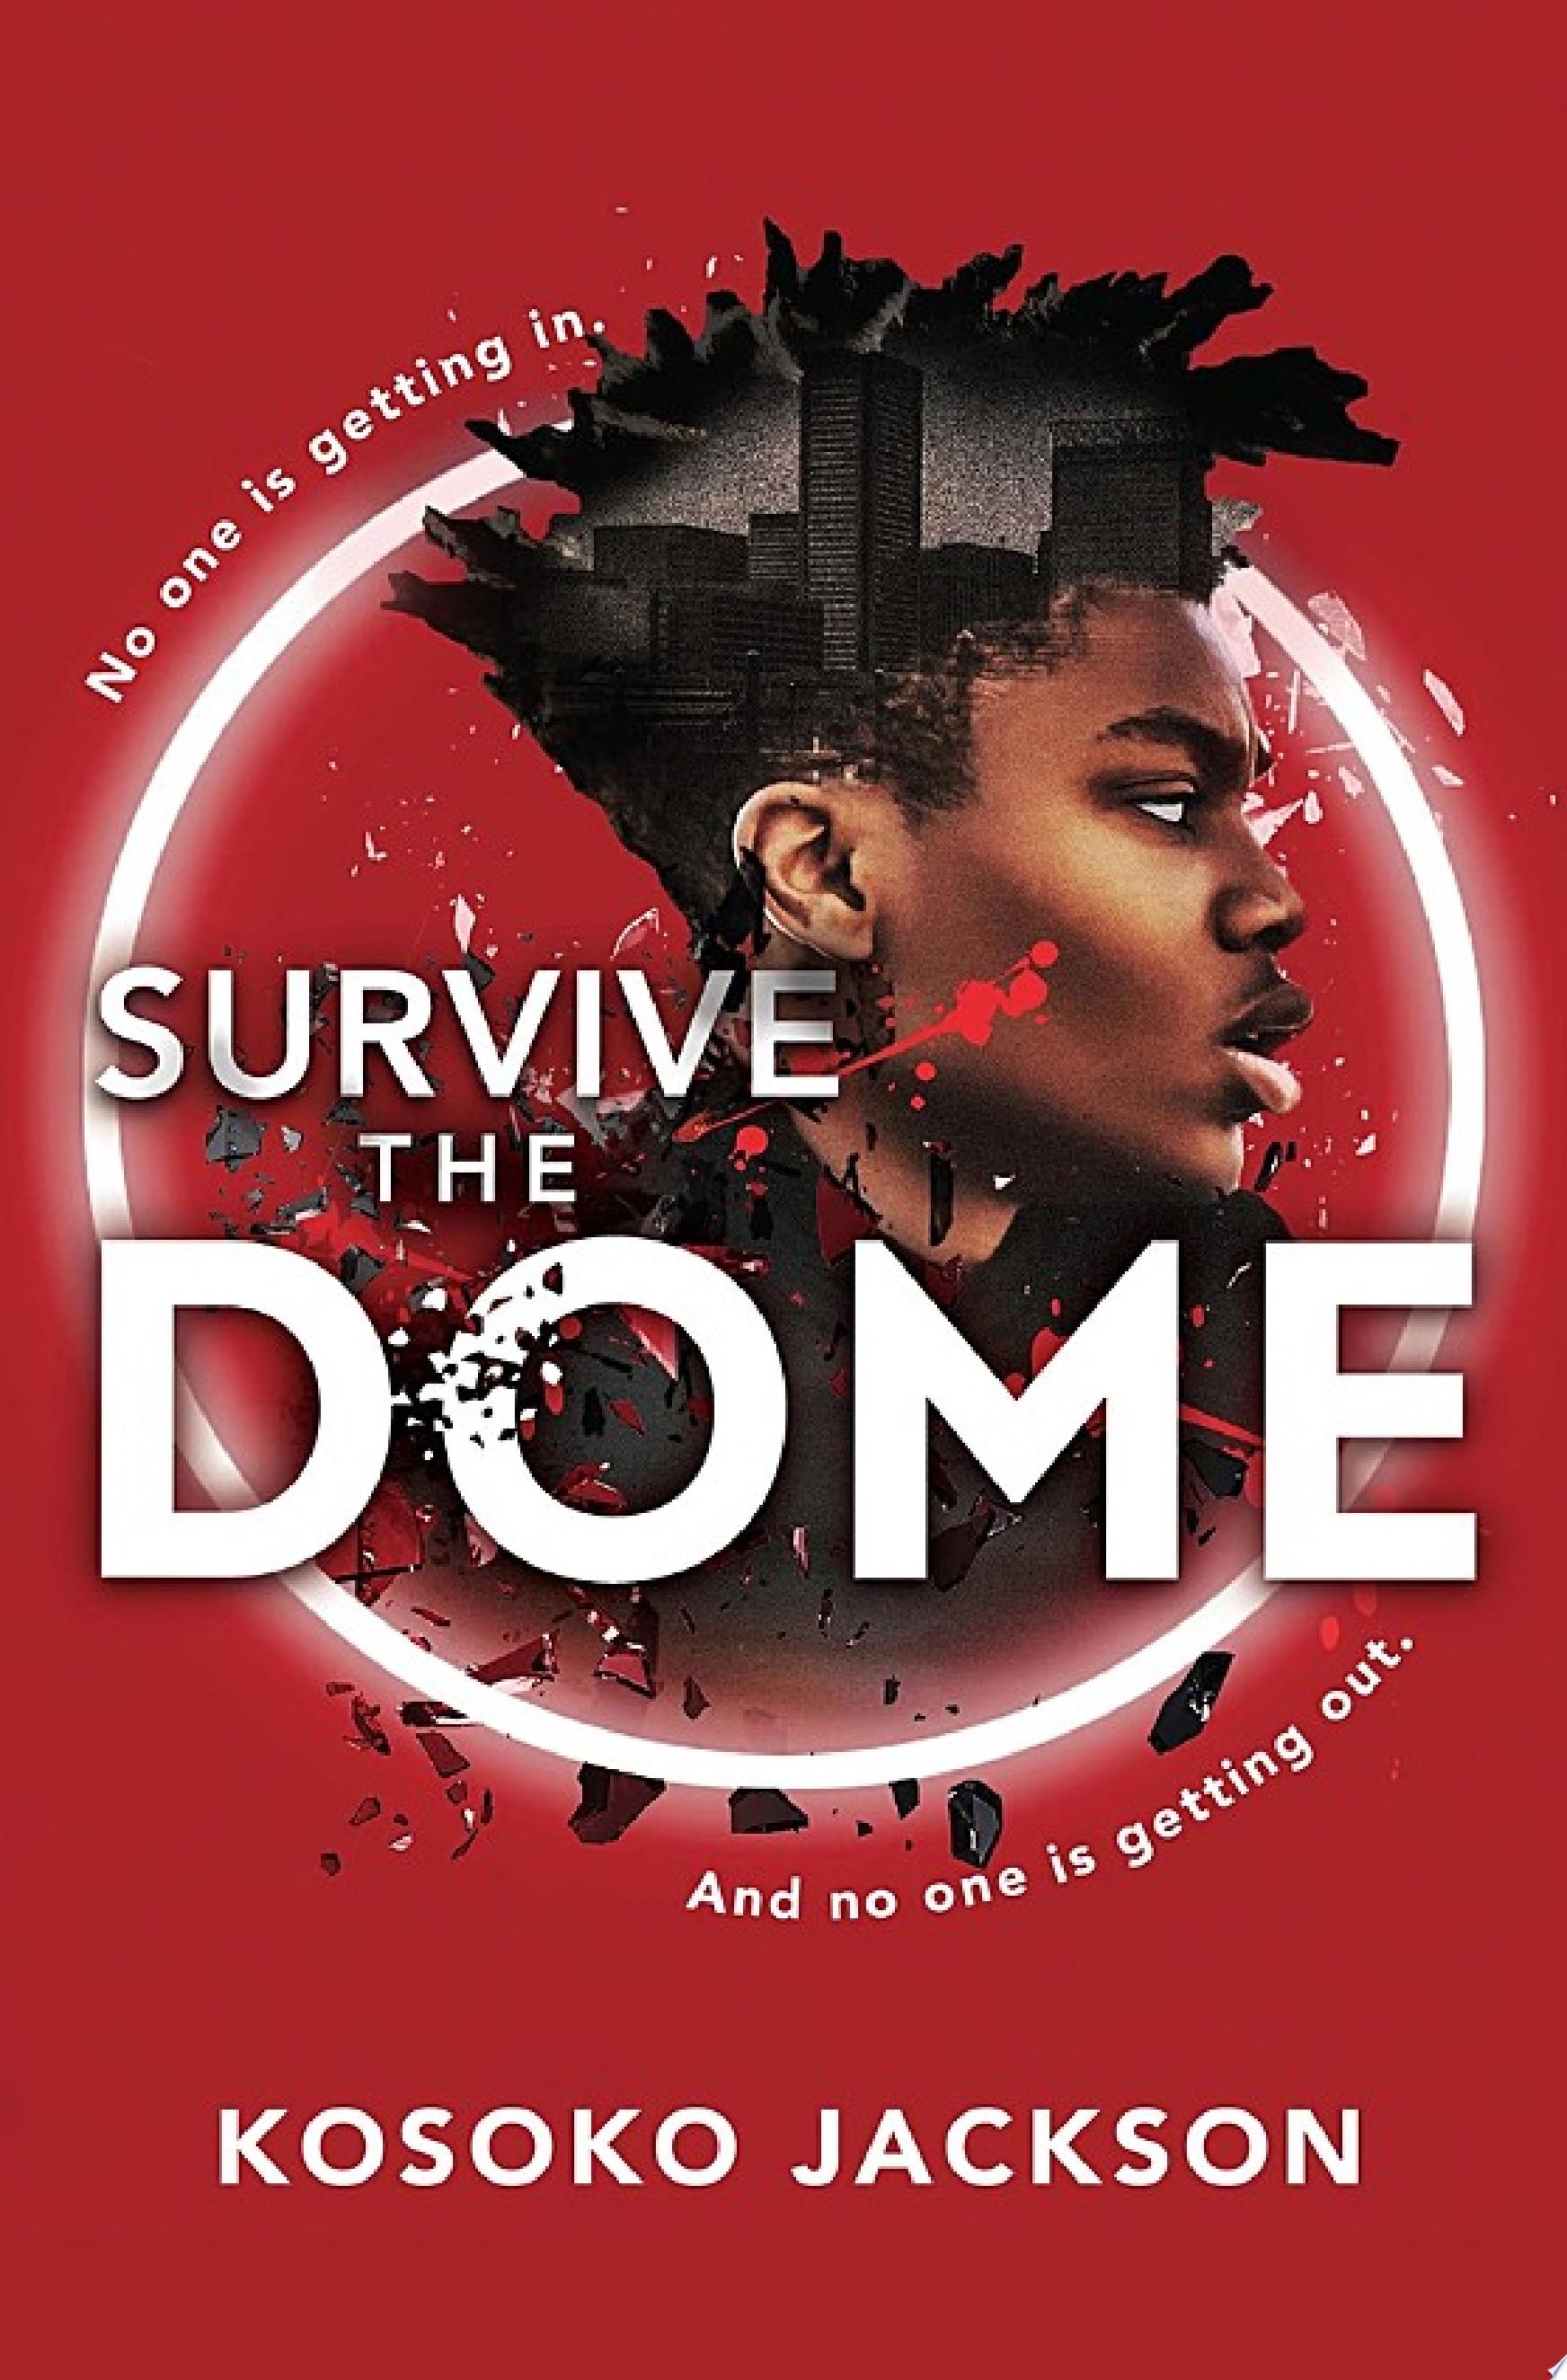 Image for "Survive the Dome"